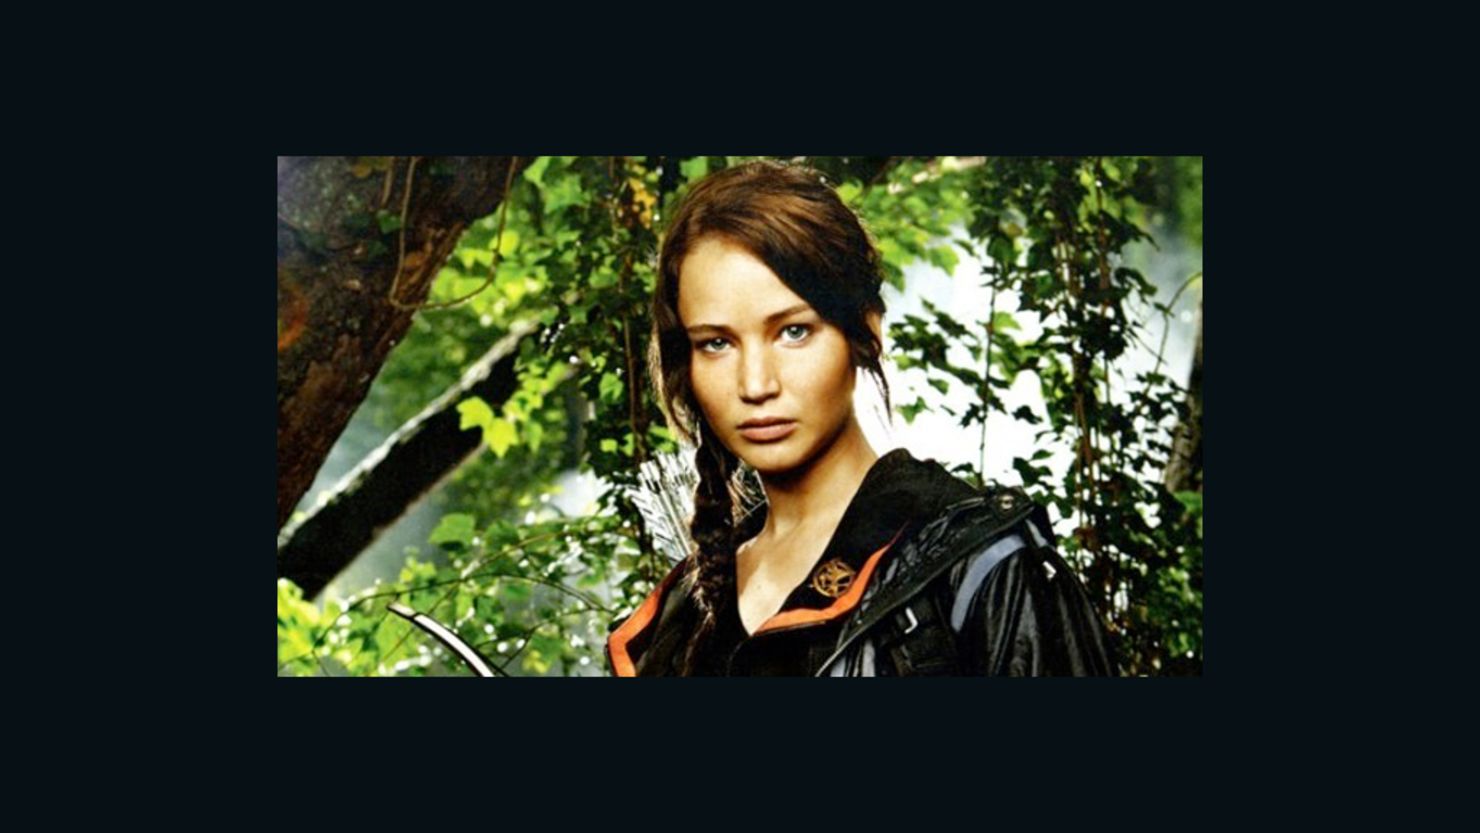 "How-to-dress like Katniss" web pages, blog posts and articles are being bookmarked and pinned up by girls of all ages.